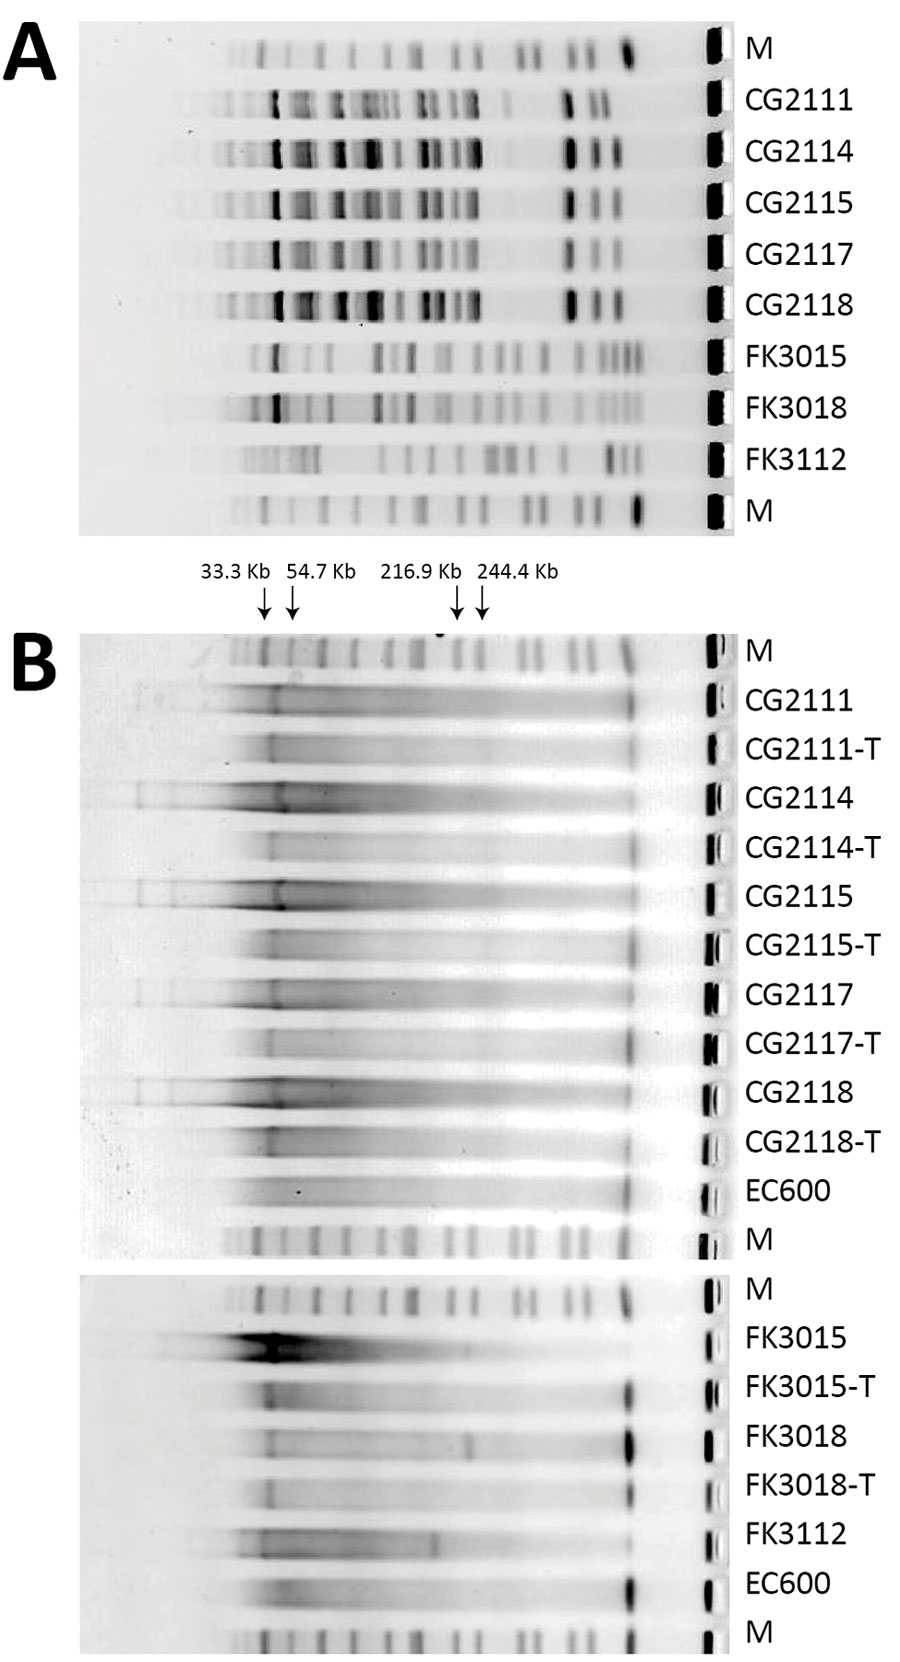 Pulsed-field gel electrophoresis (PFGE) profiles of selected Klebsiella pneumoniae carbapenemase 3–producing Enterobacterales strains isolated from patients at a tertiary hospital in Ningbo, Zhejiang Province, China, August 1, 2020–June 30, 2021. A) PFGE profiles. B) S1-nuclease PFGE profiles. EC, Escherichia coli EC; M, Salmonella enterica serotype Braenderup strain H9812; -T, the transconjugants of the corresponding strain. 